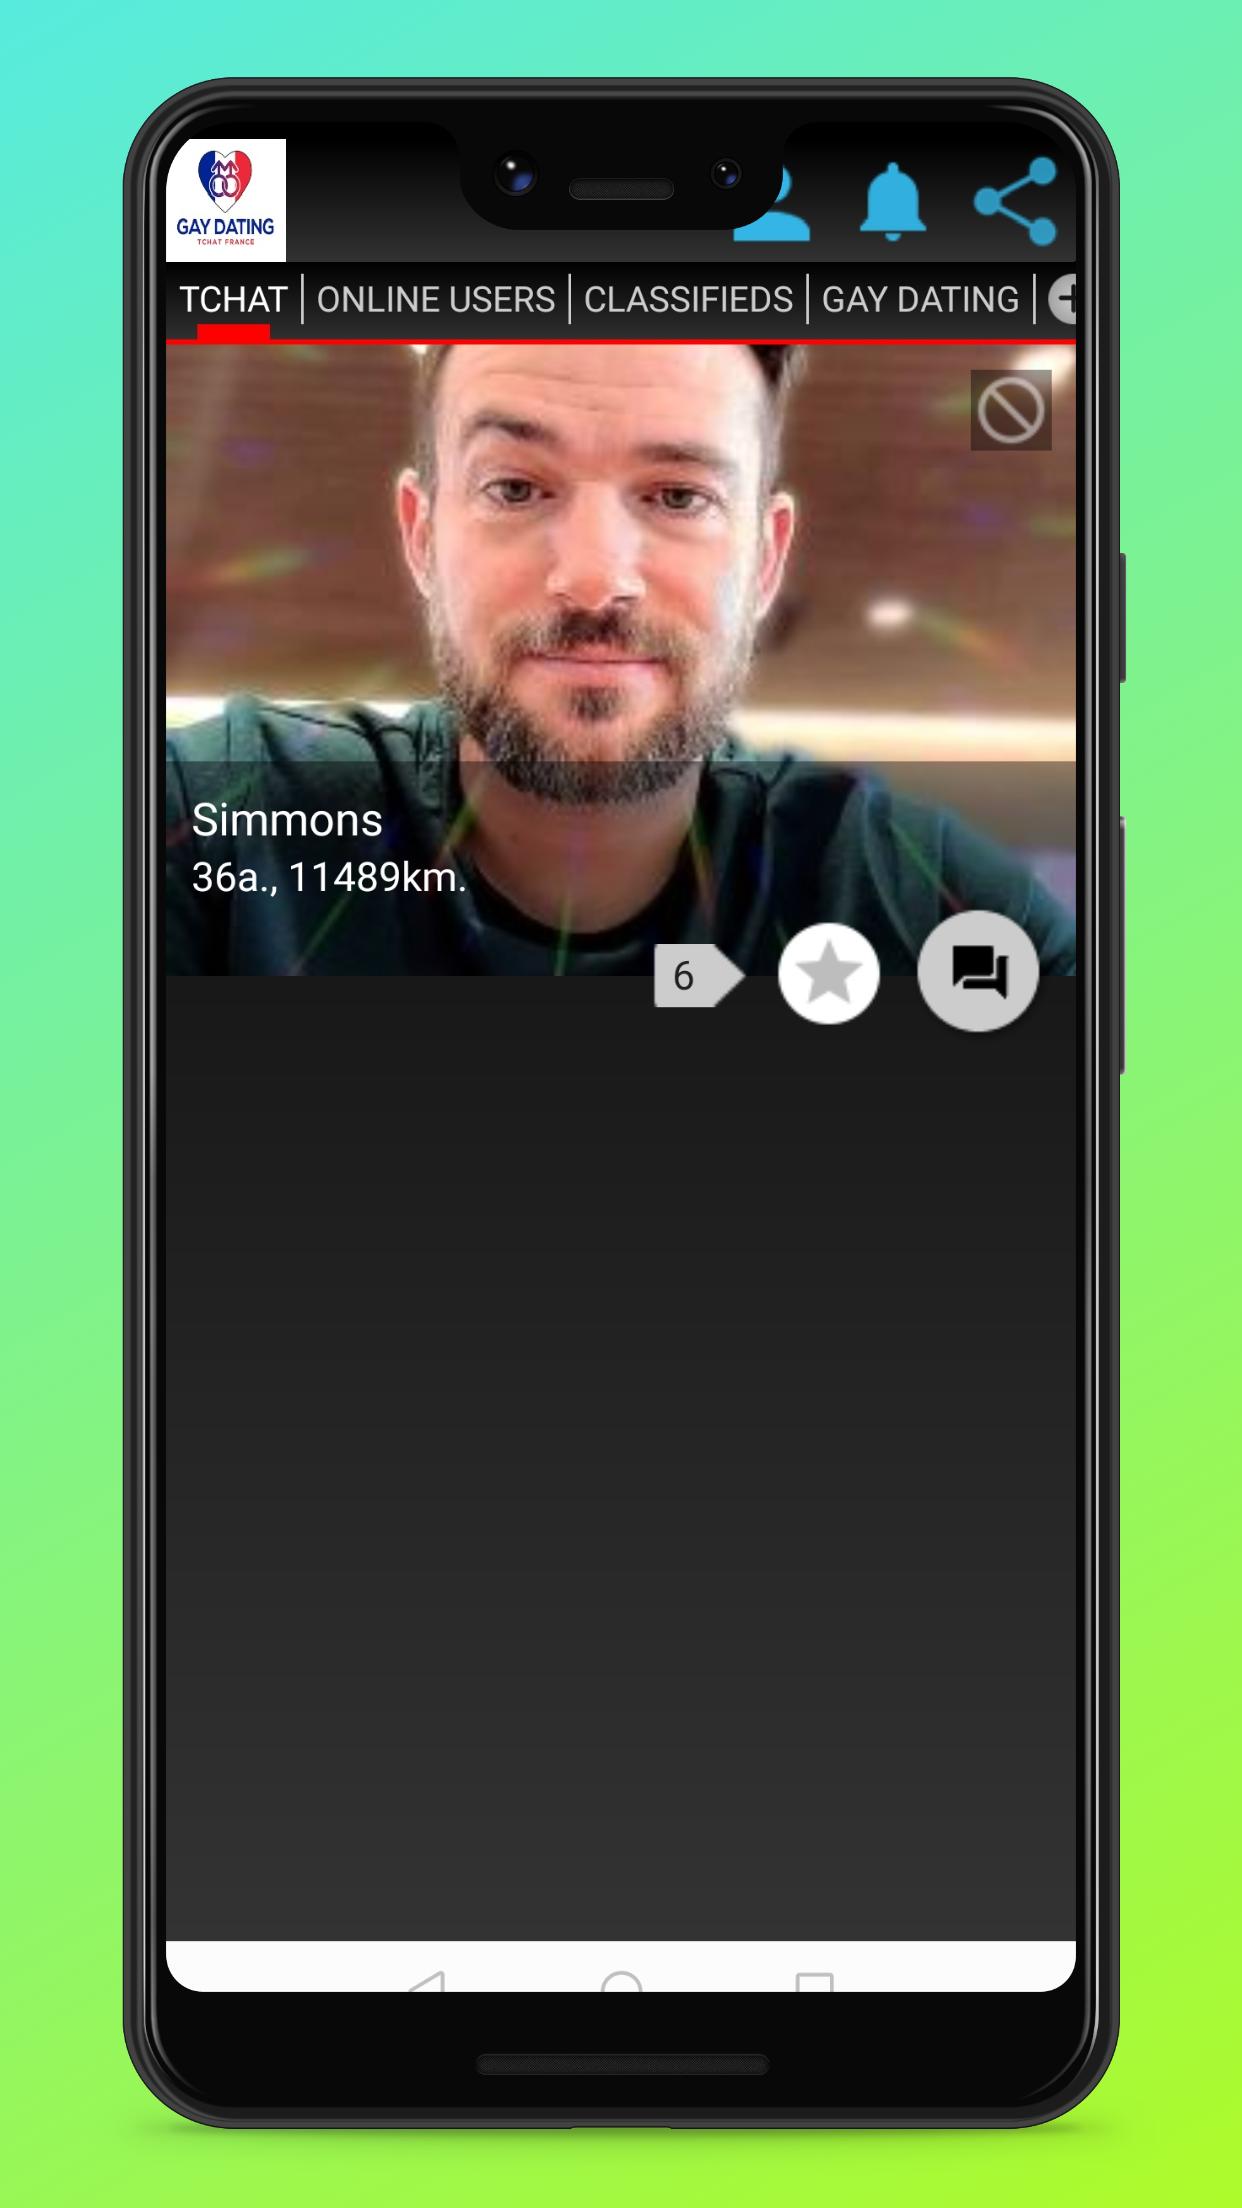 Gay chat app for android